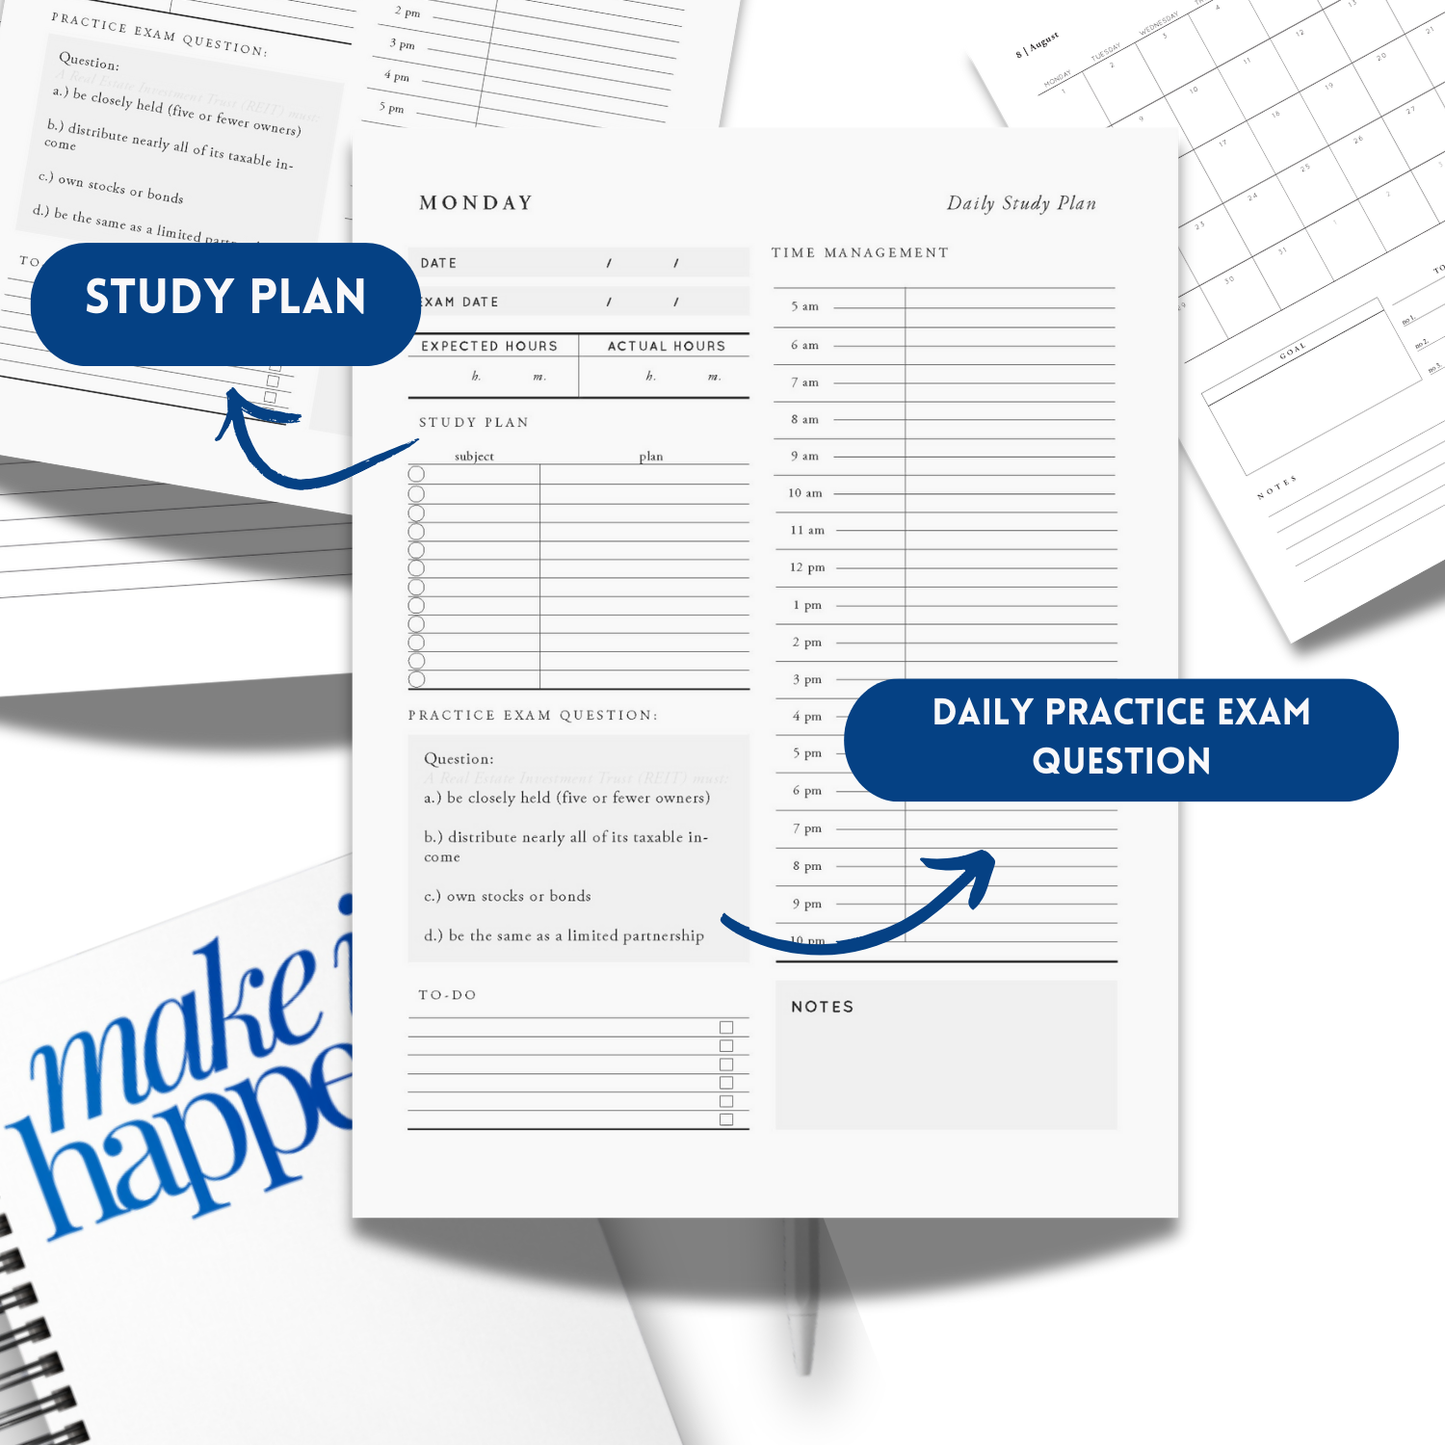 2024 Real Estate Student Planner (PHYSICAL)